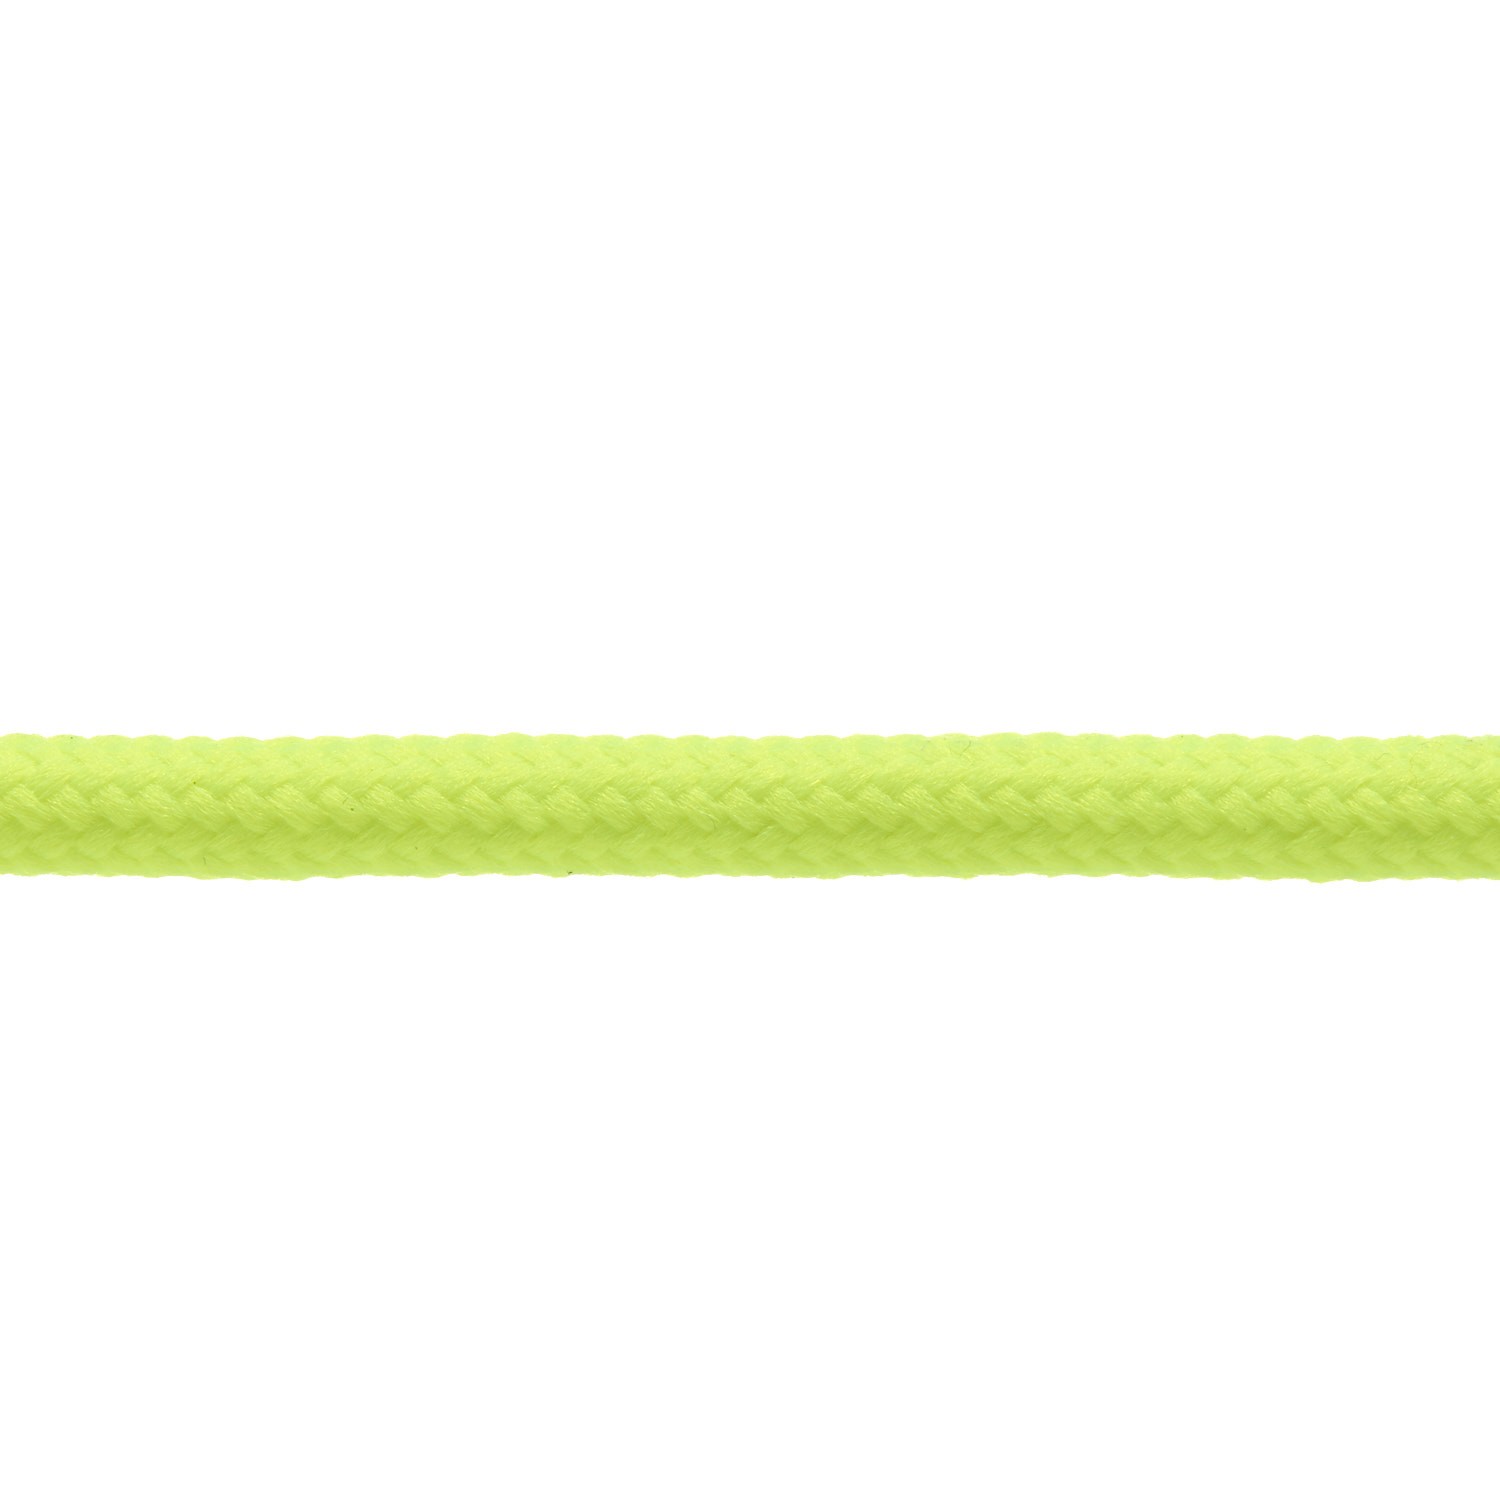 Kalsi Cords Fluorescent Yellow Round Cord Shoe Laces 3